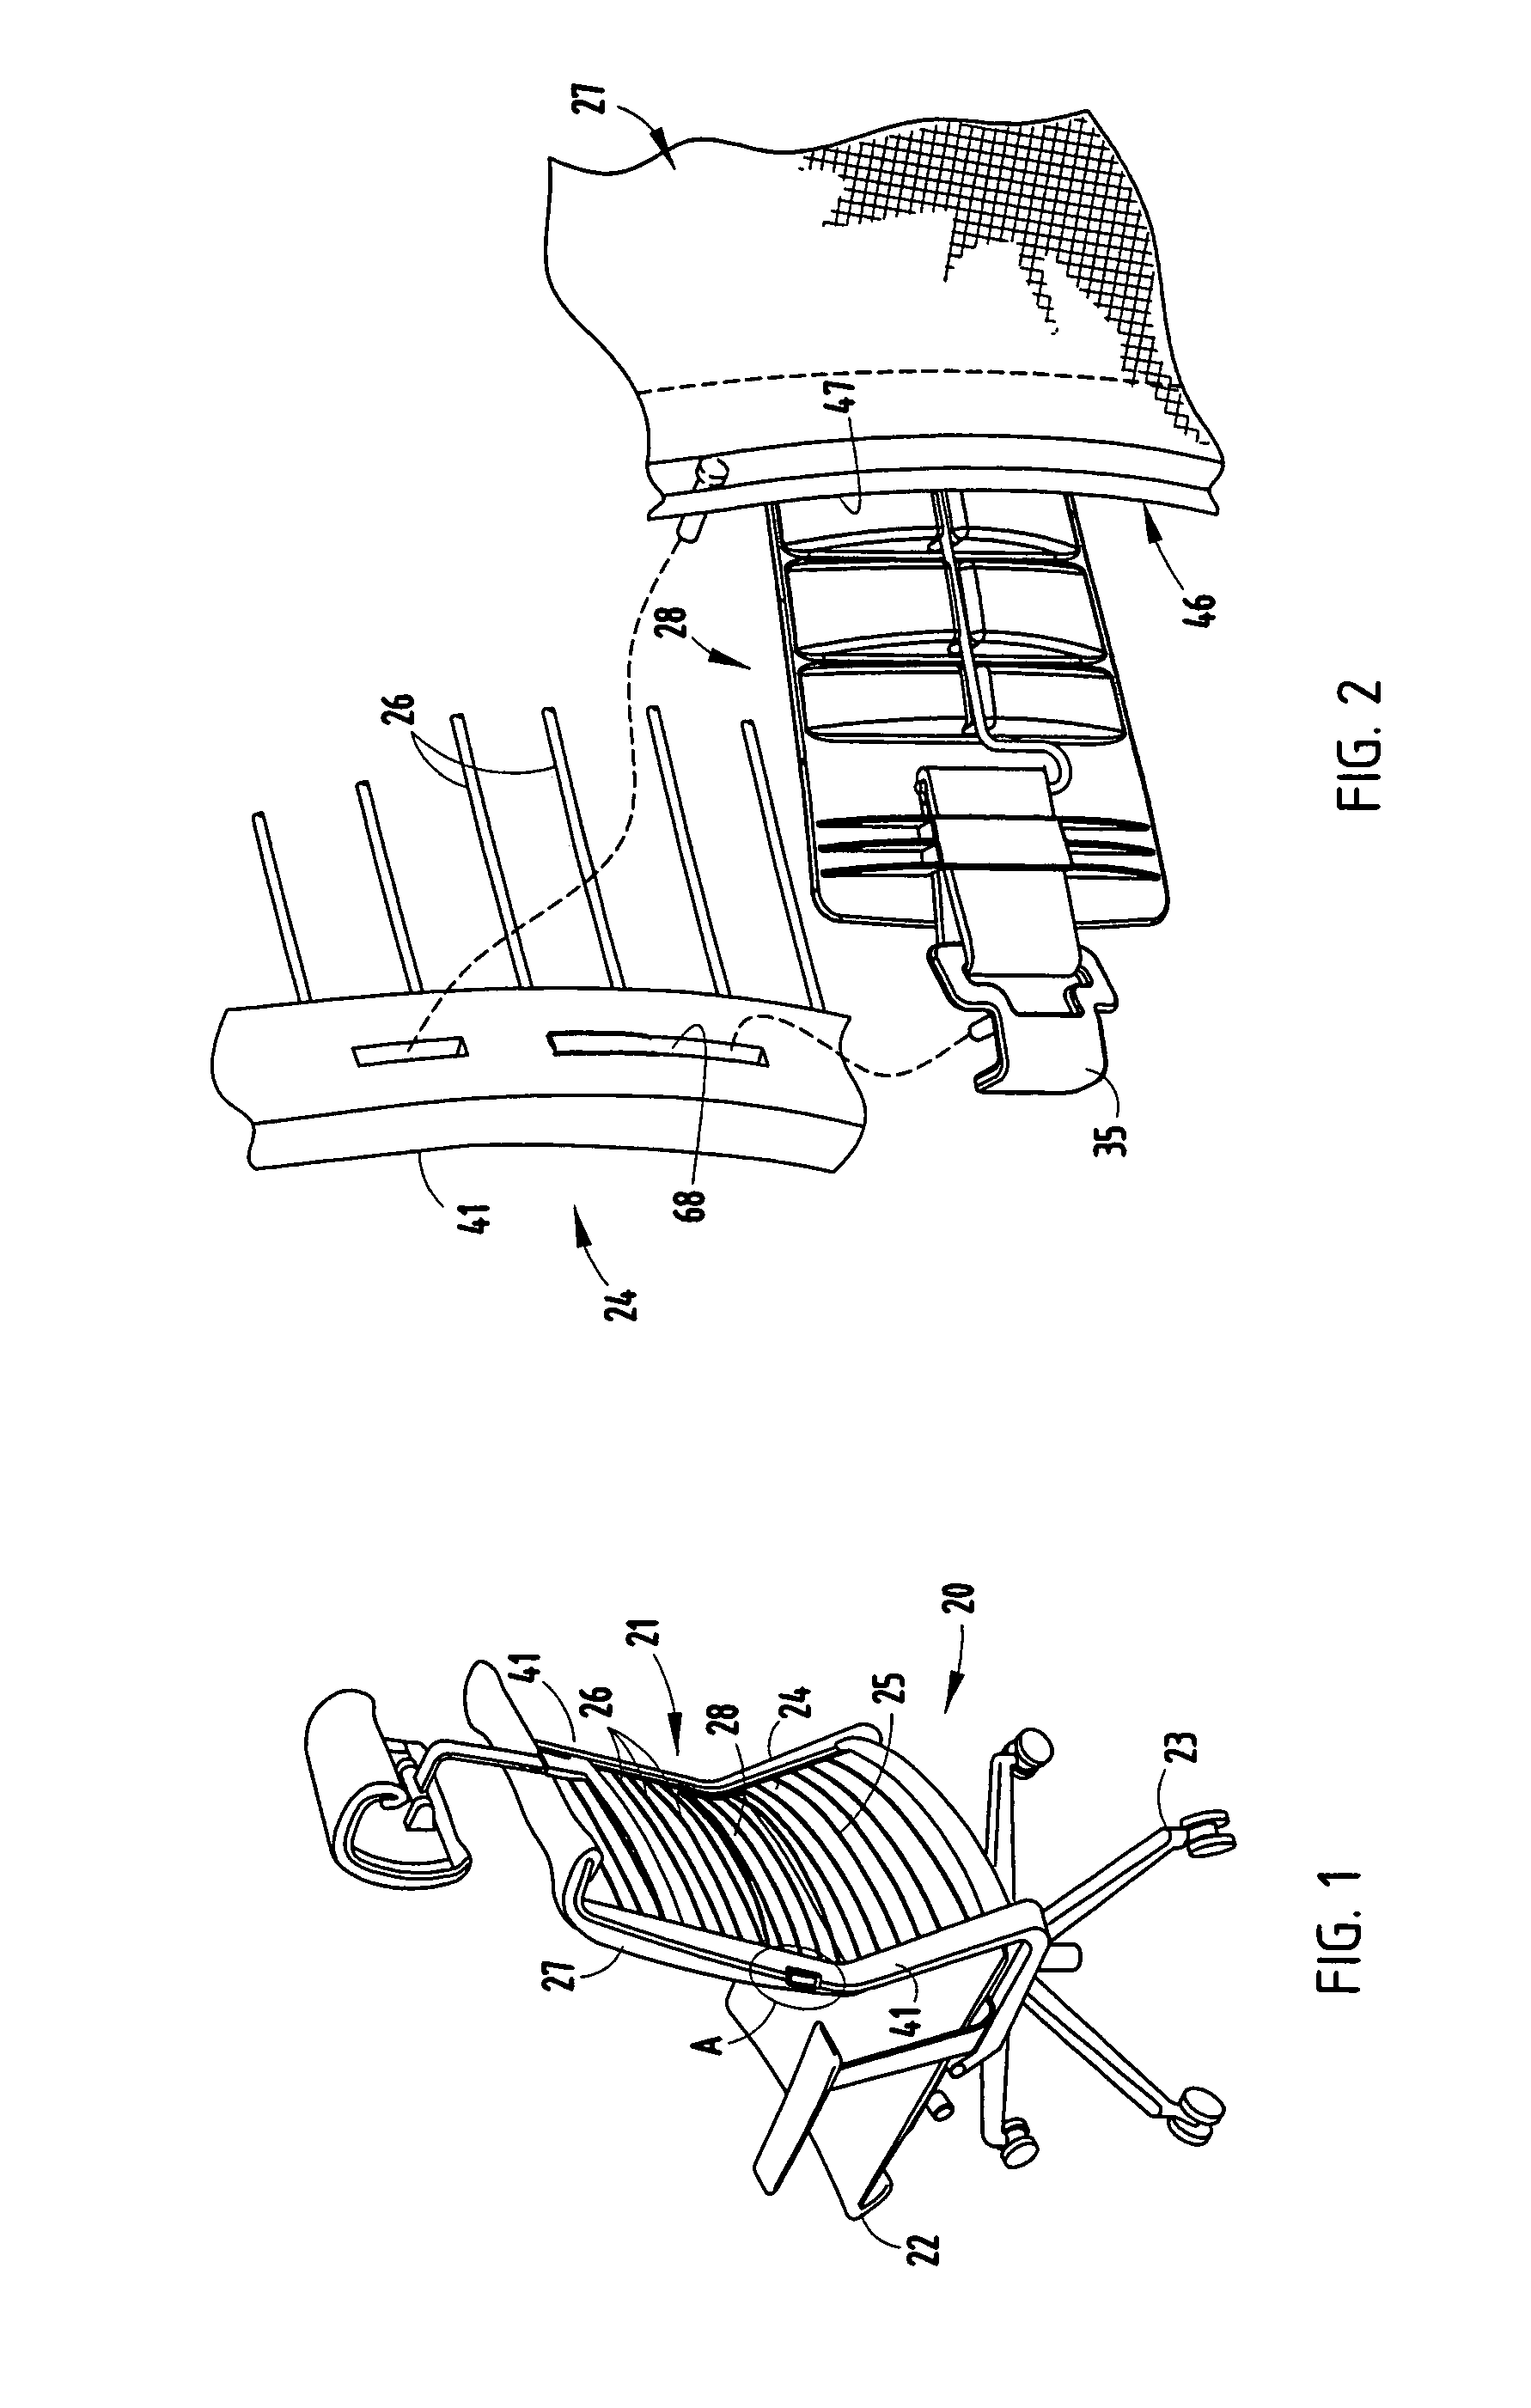 Seating unit with adjustable lumbar device